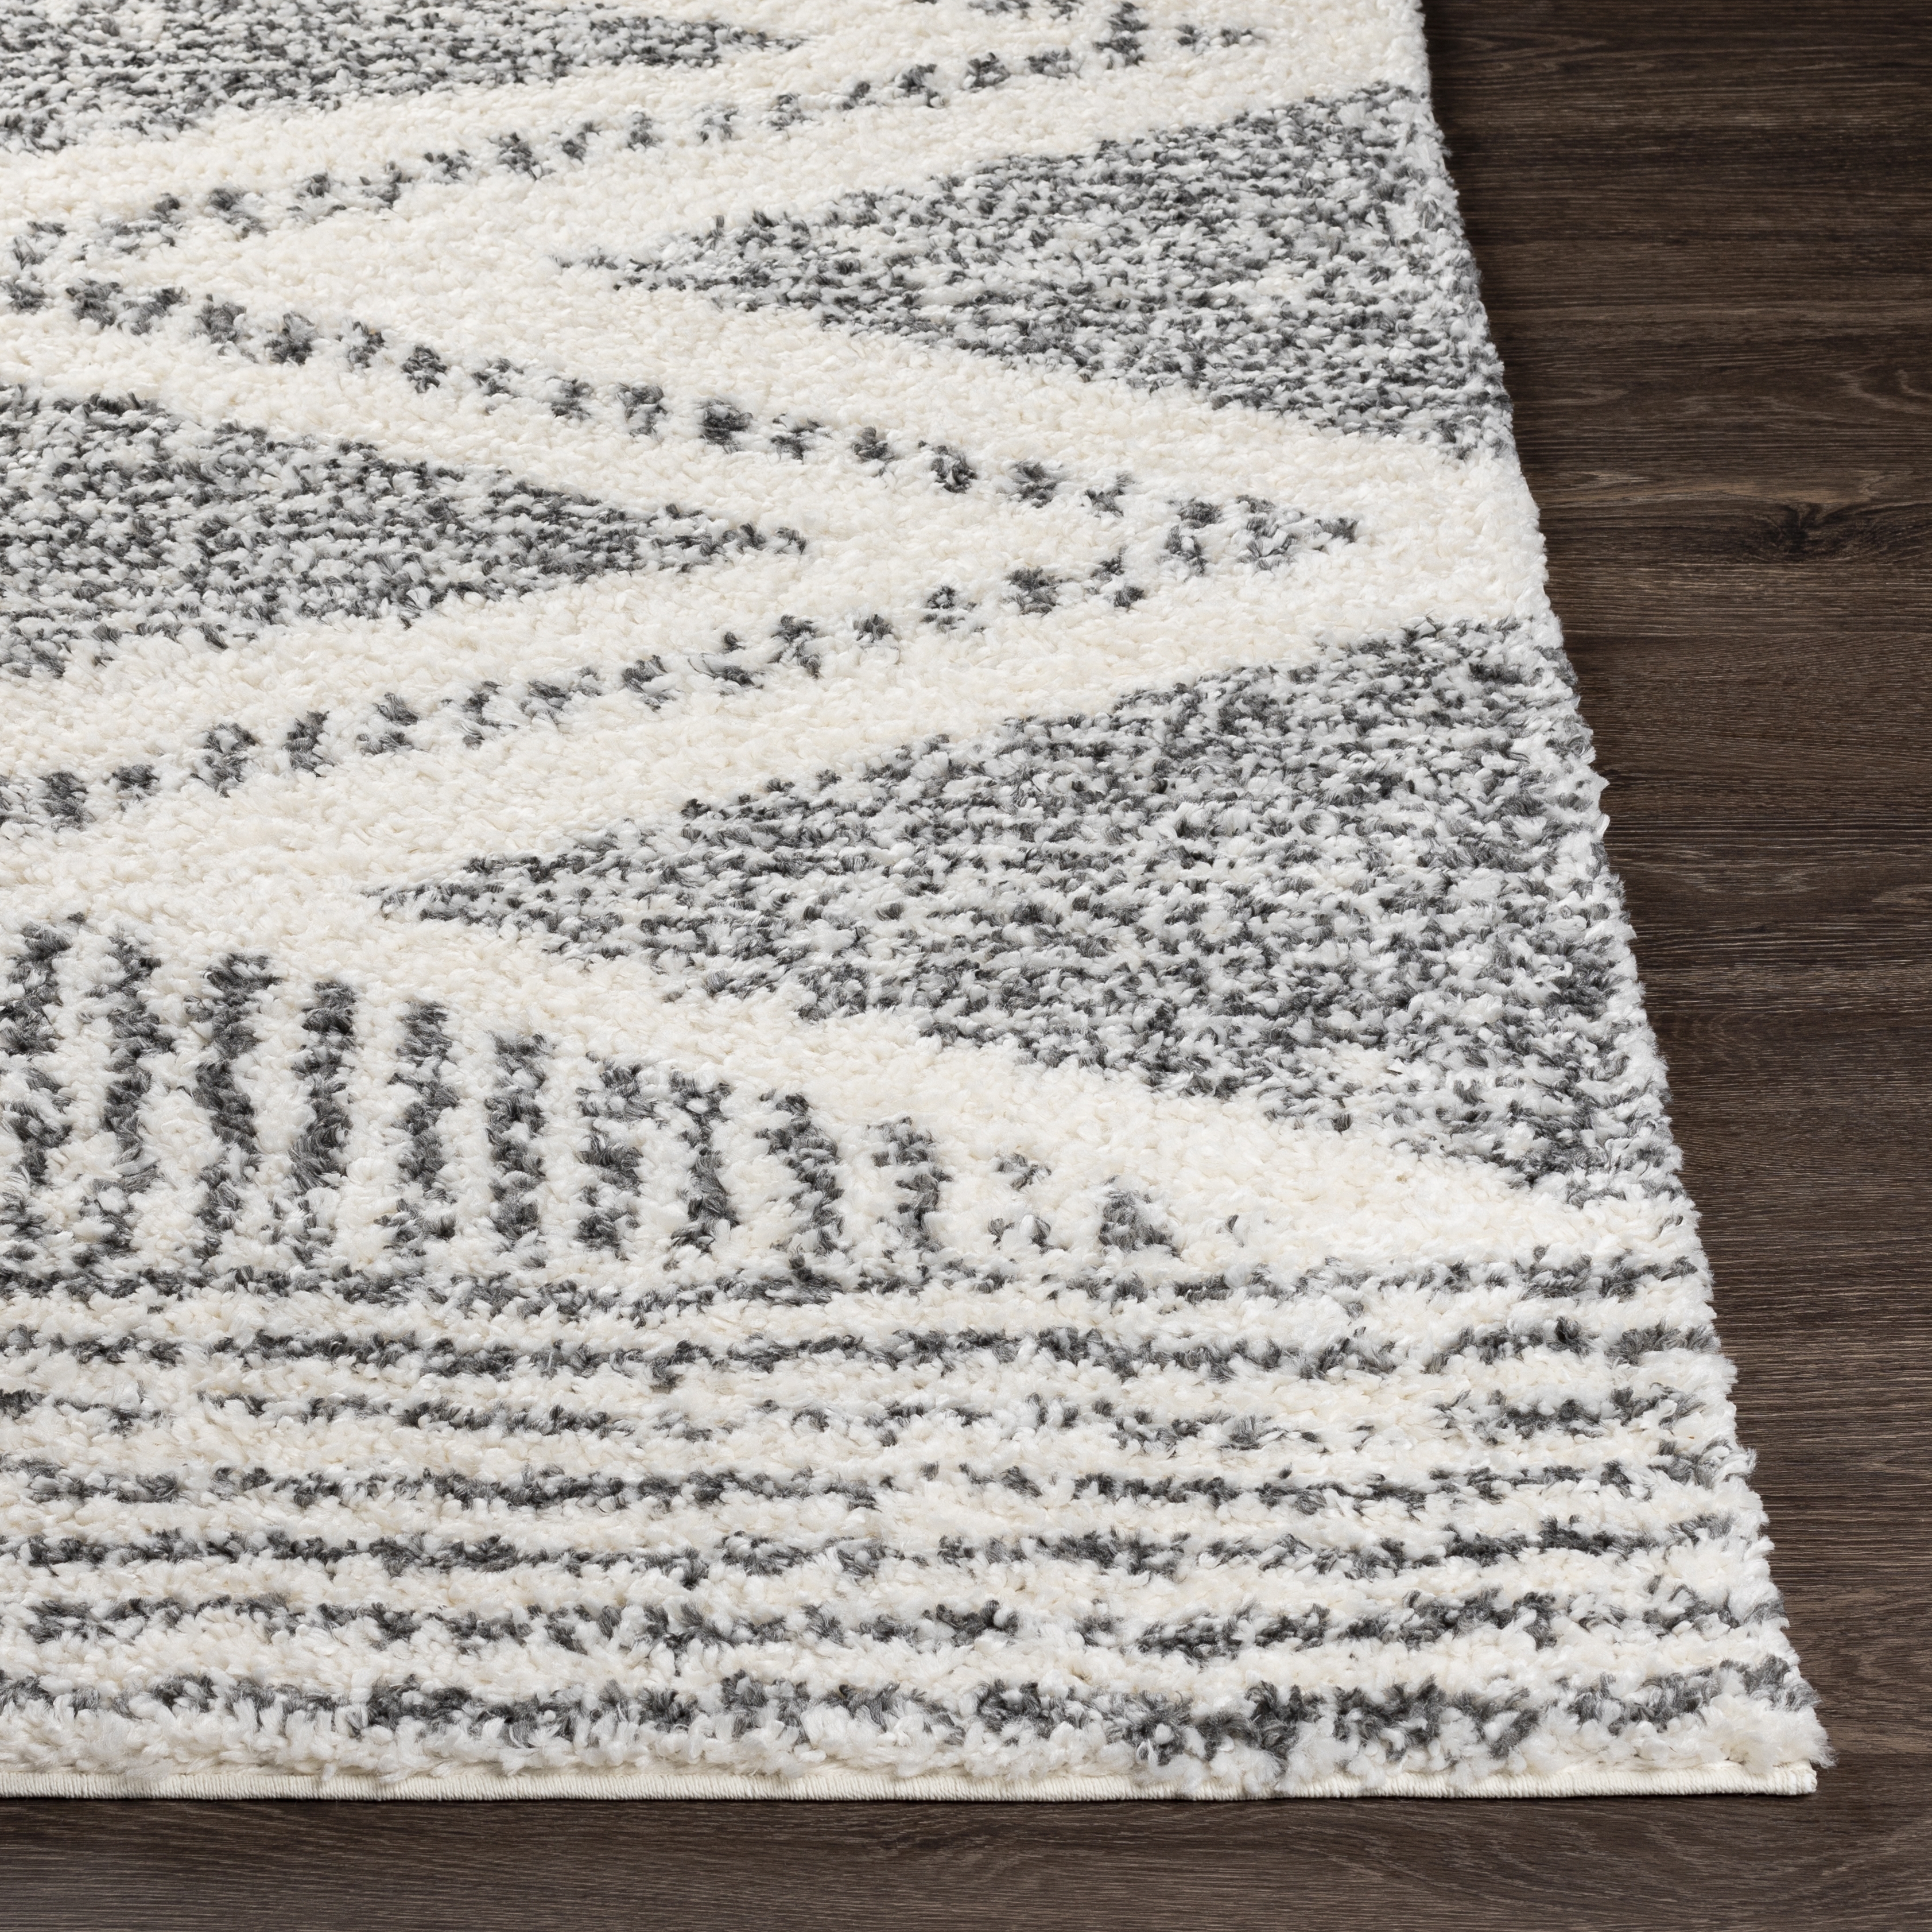 Deluxe Shag Rug, 2' x 2'11" - Image 2